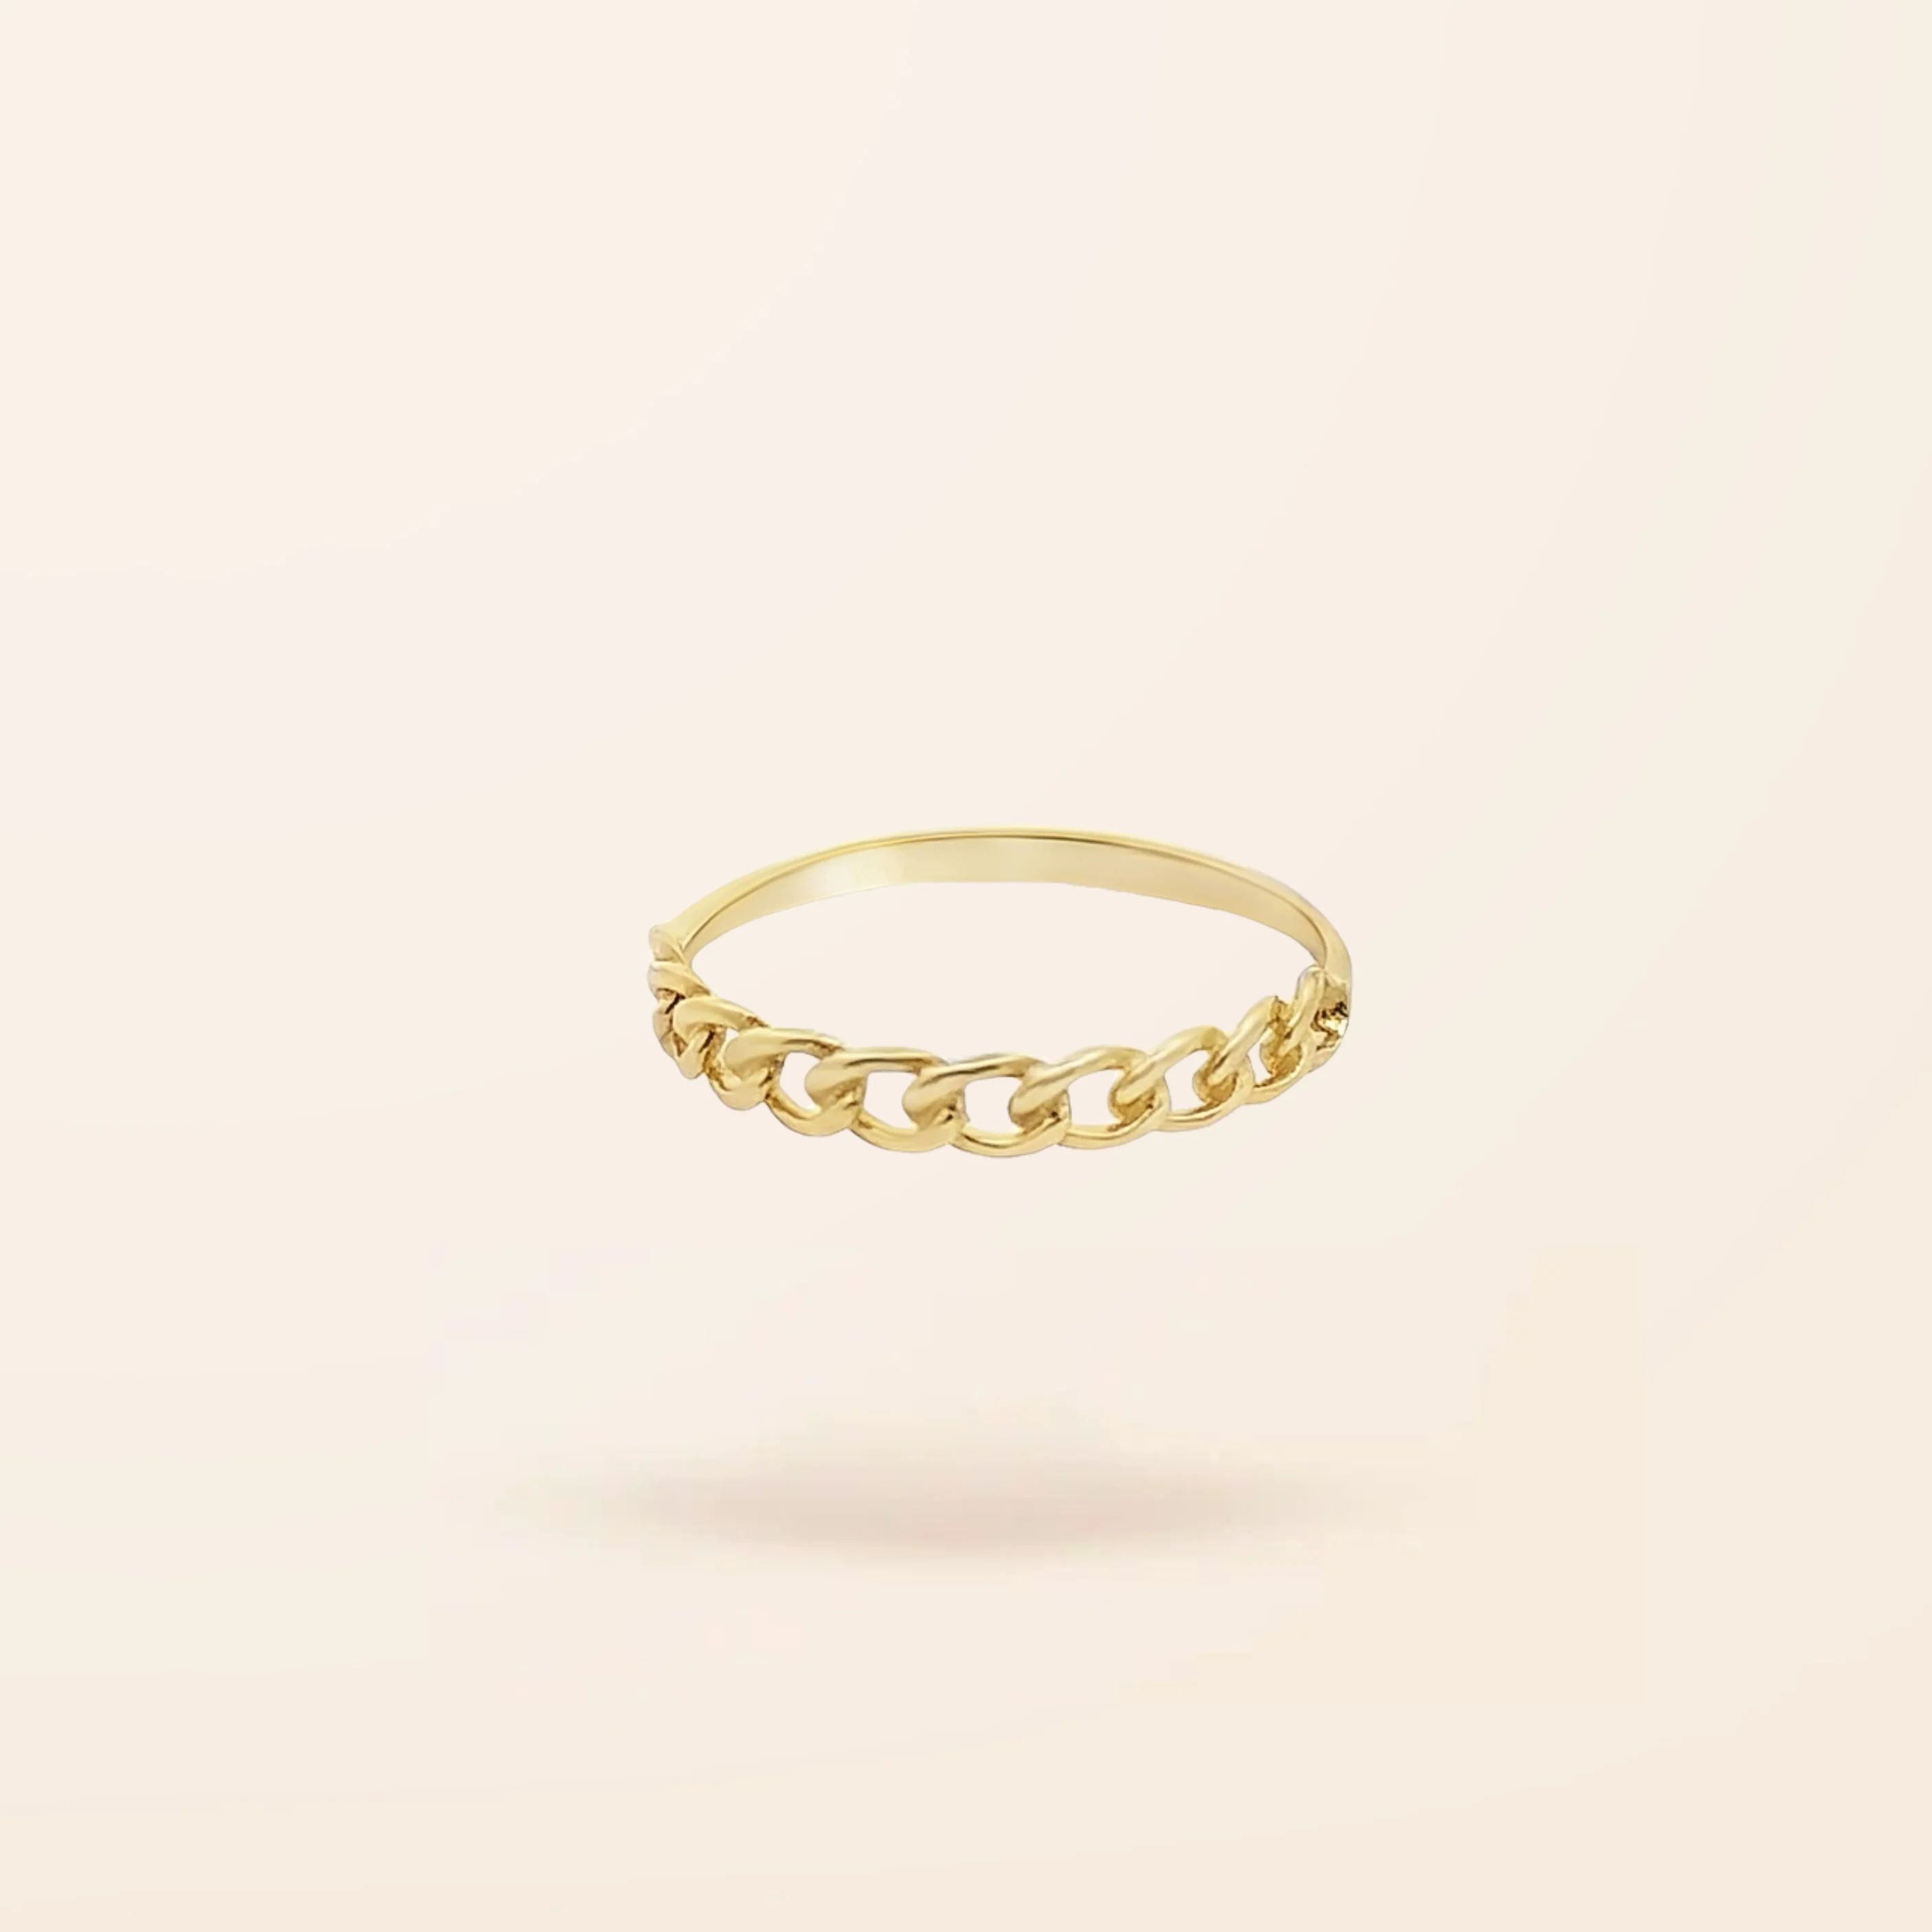 10K Gold Small Chain Ring | Van Der Hout Jewelry